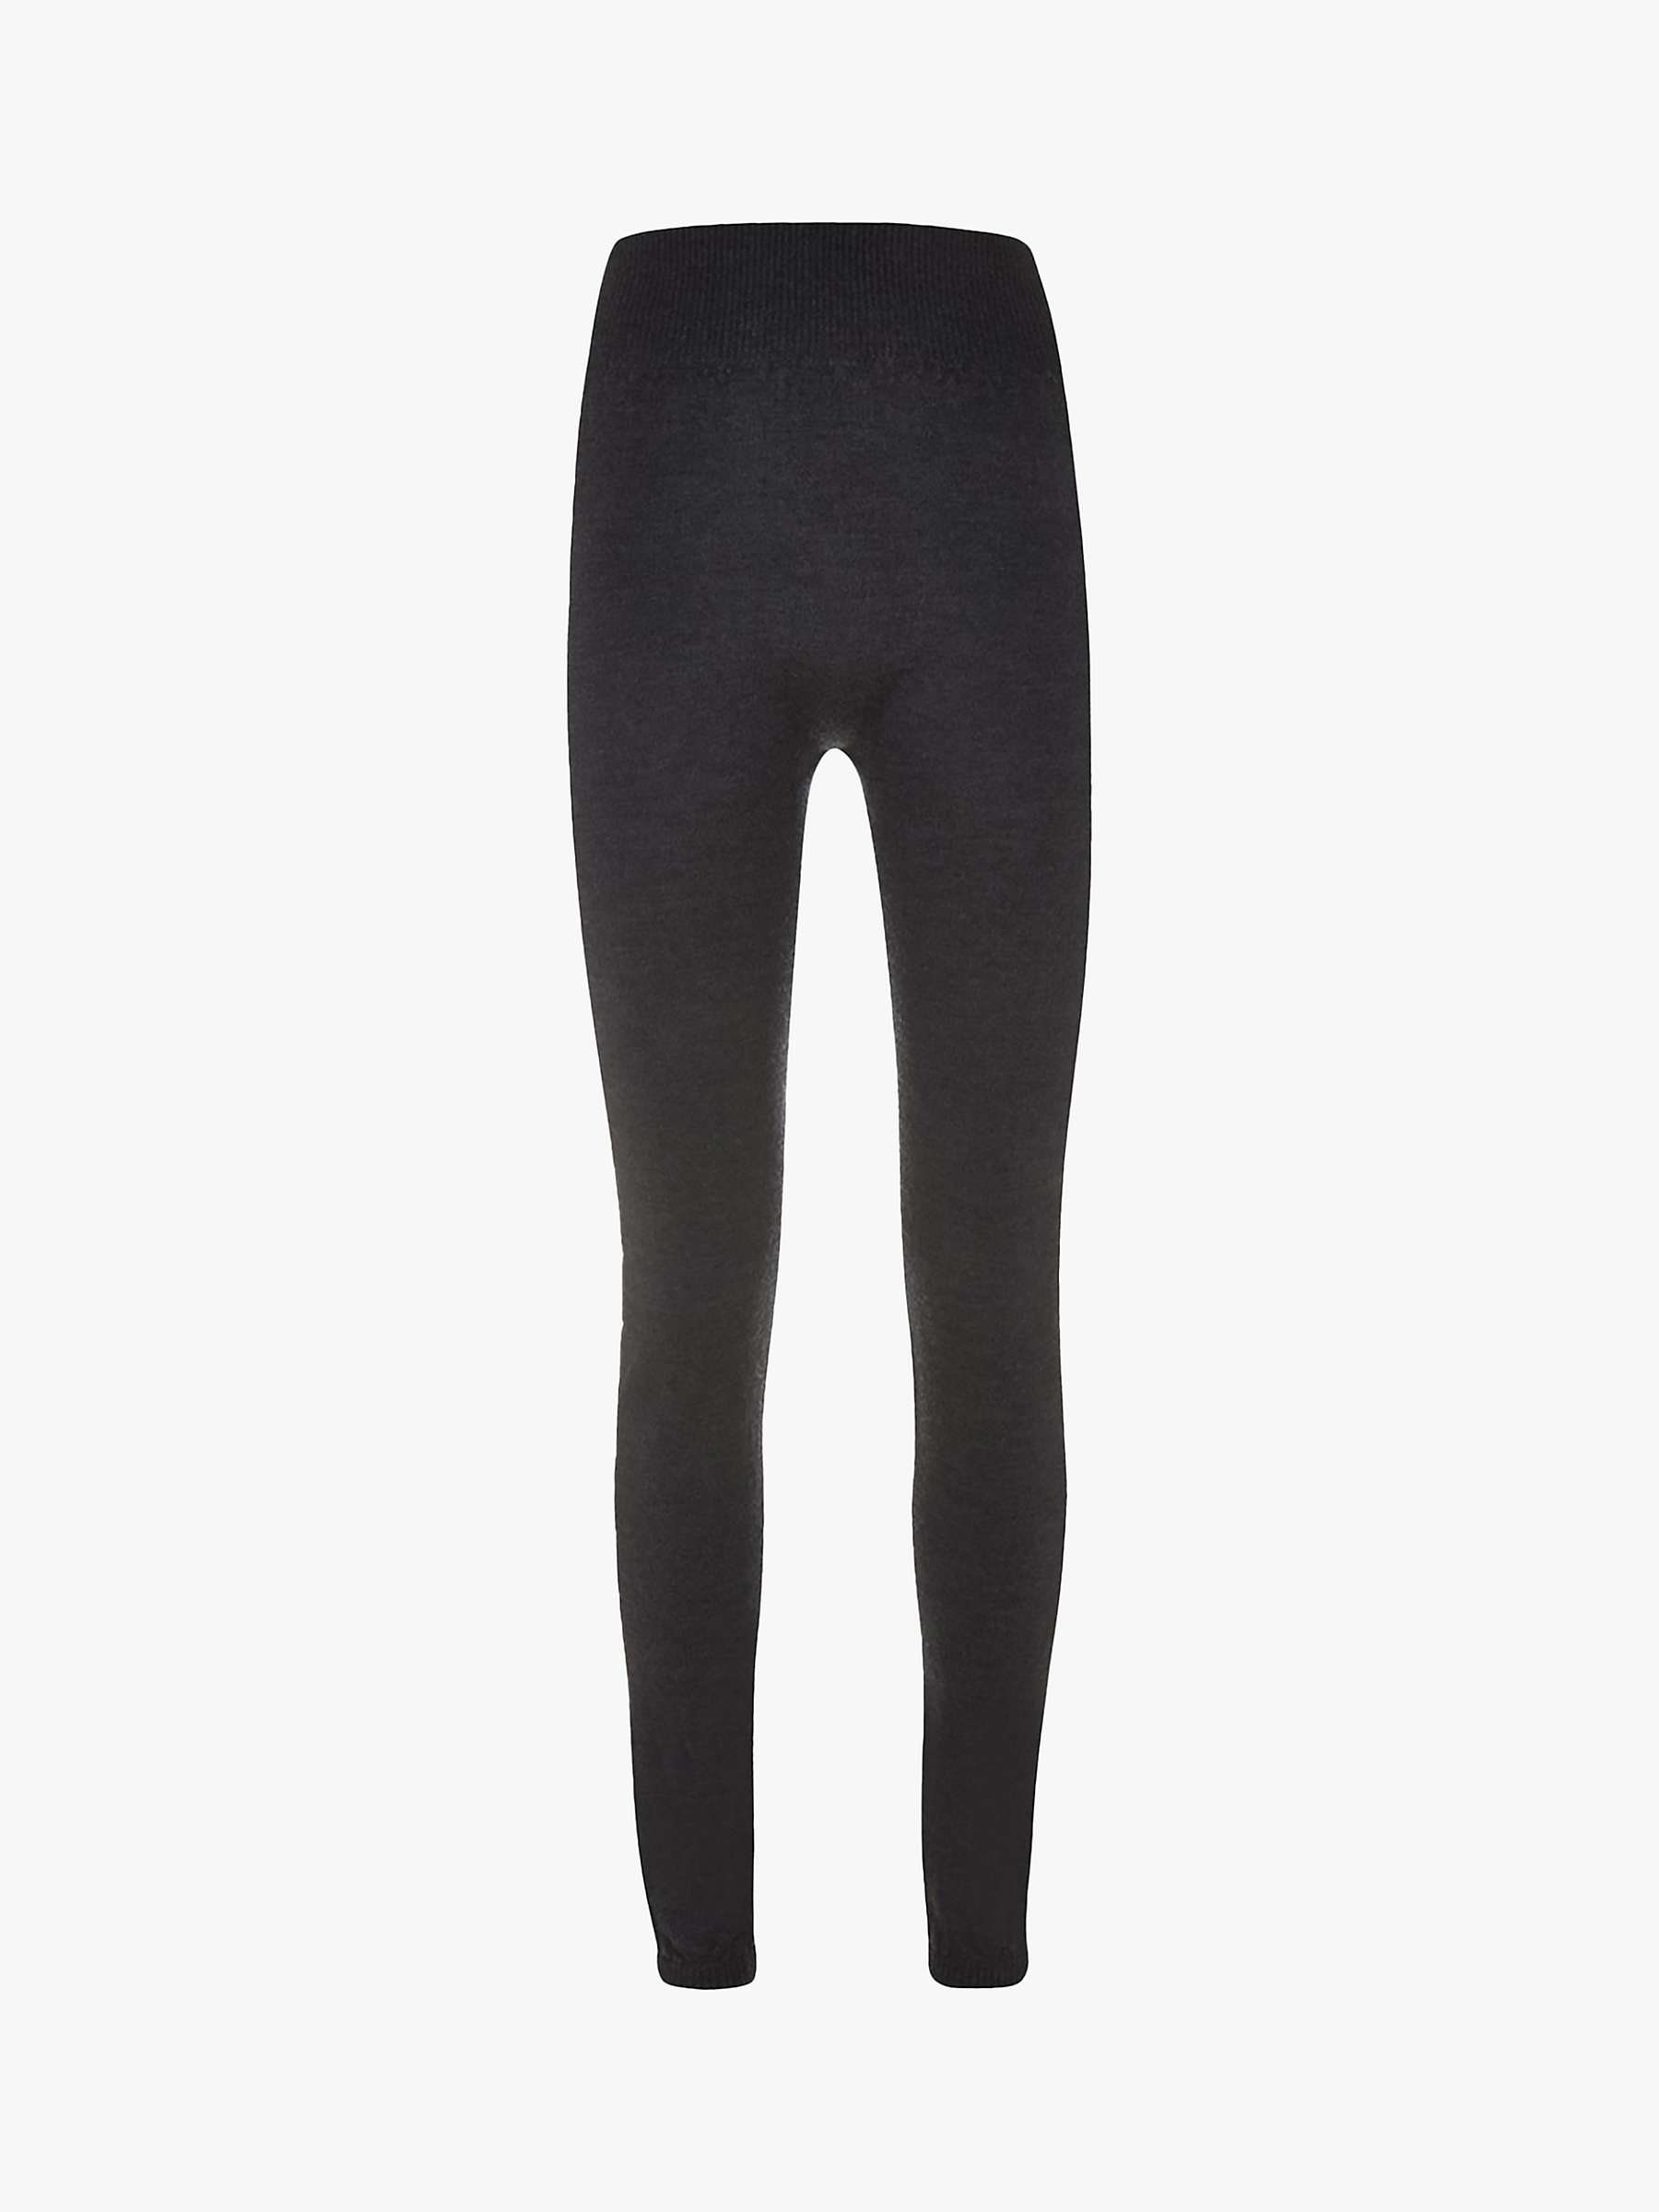 Buy Celtic & Co. Merino Wool Lounge Trousers Online at johnlewis.com